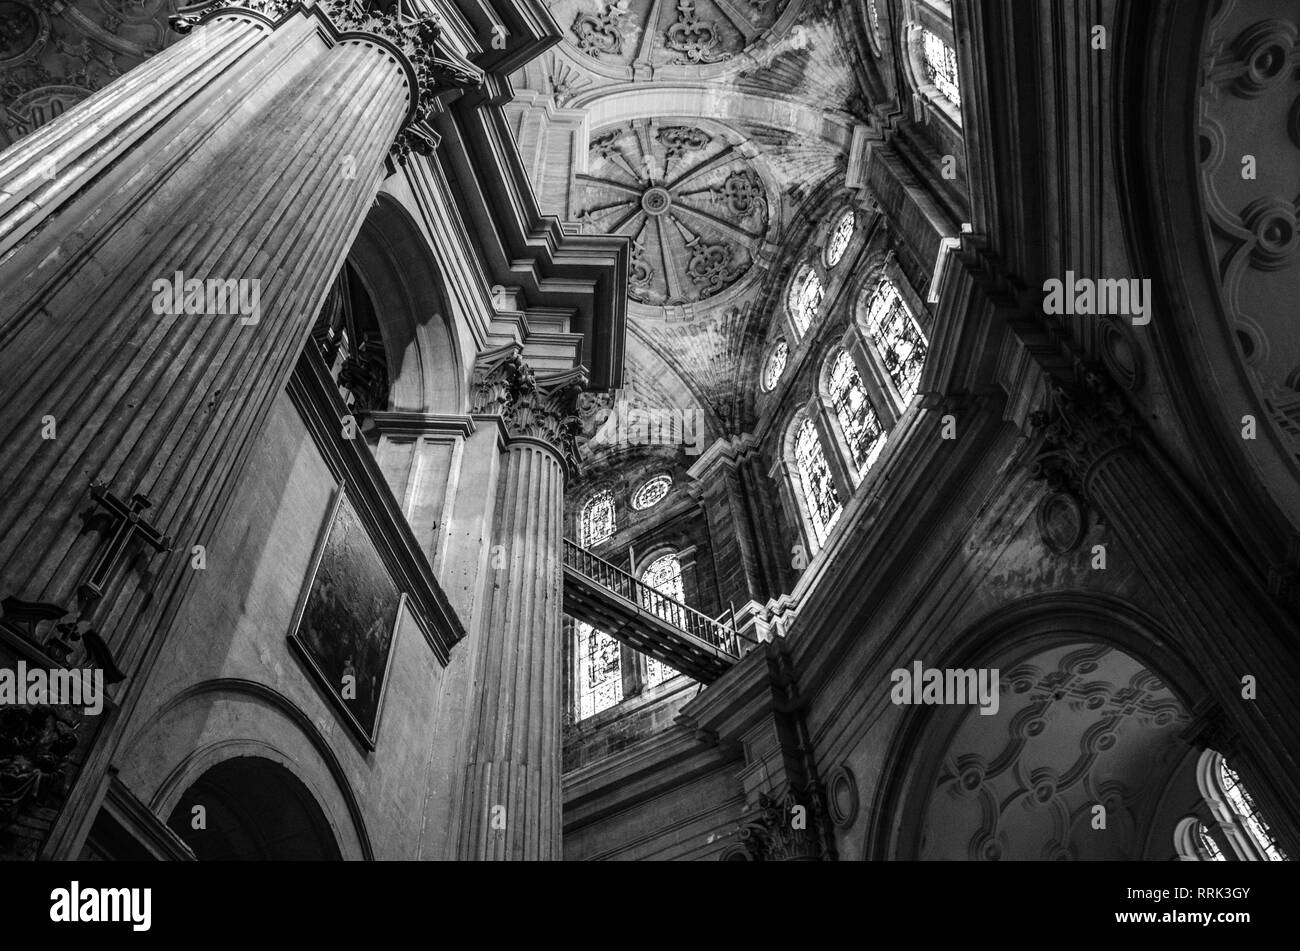 Interior of the Malaga Cathedral, black and white Stock Photo